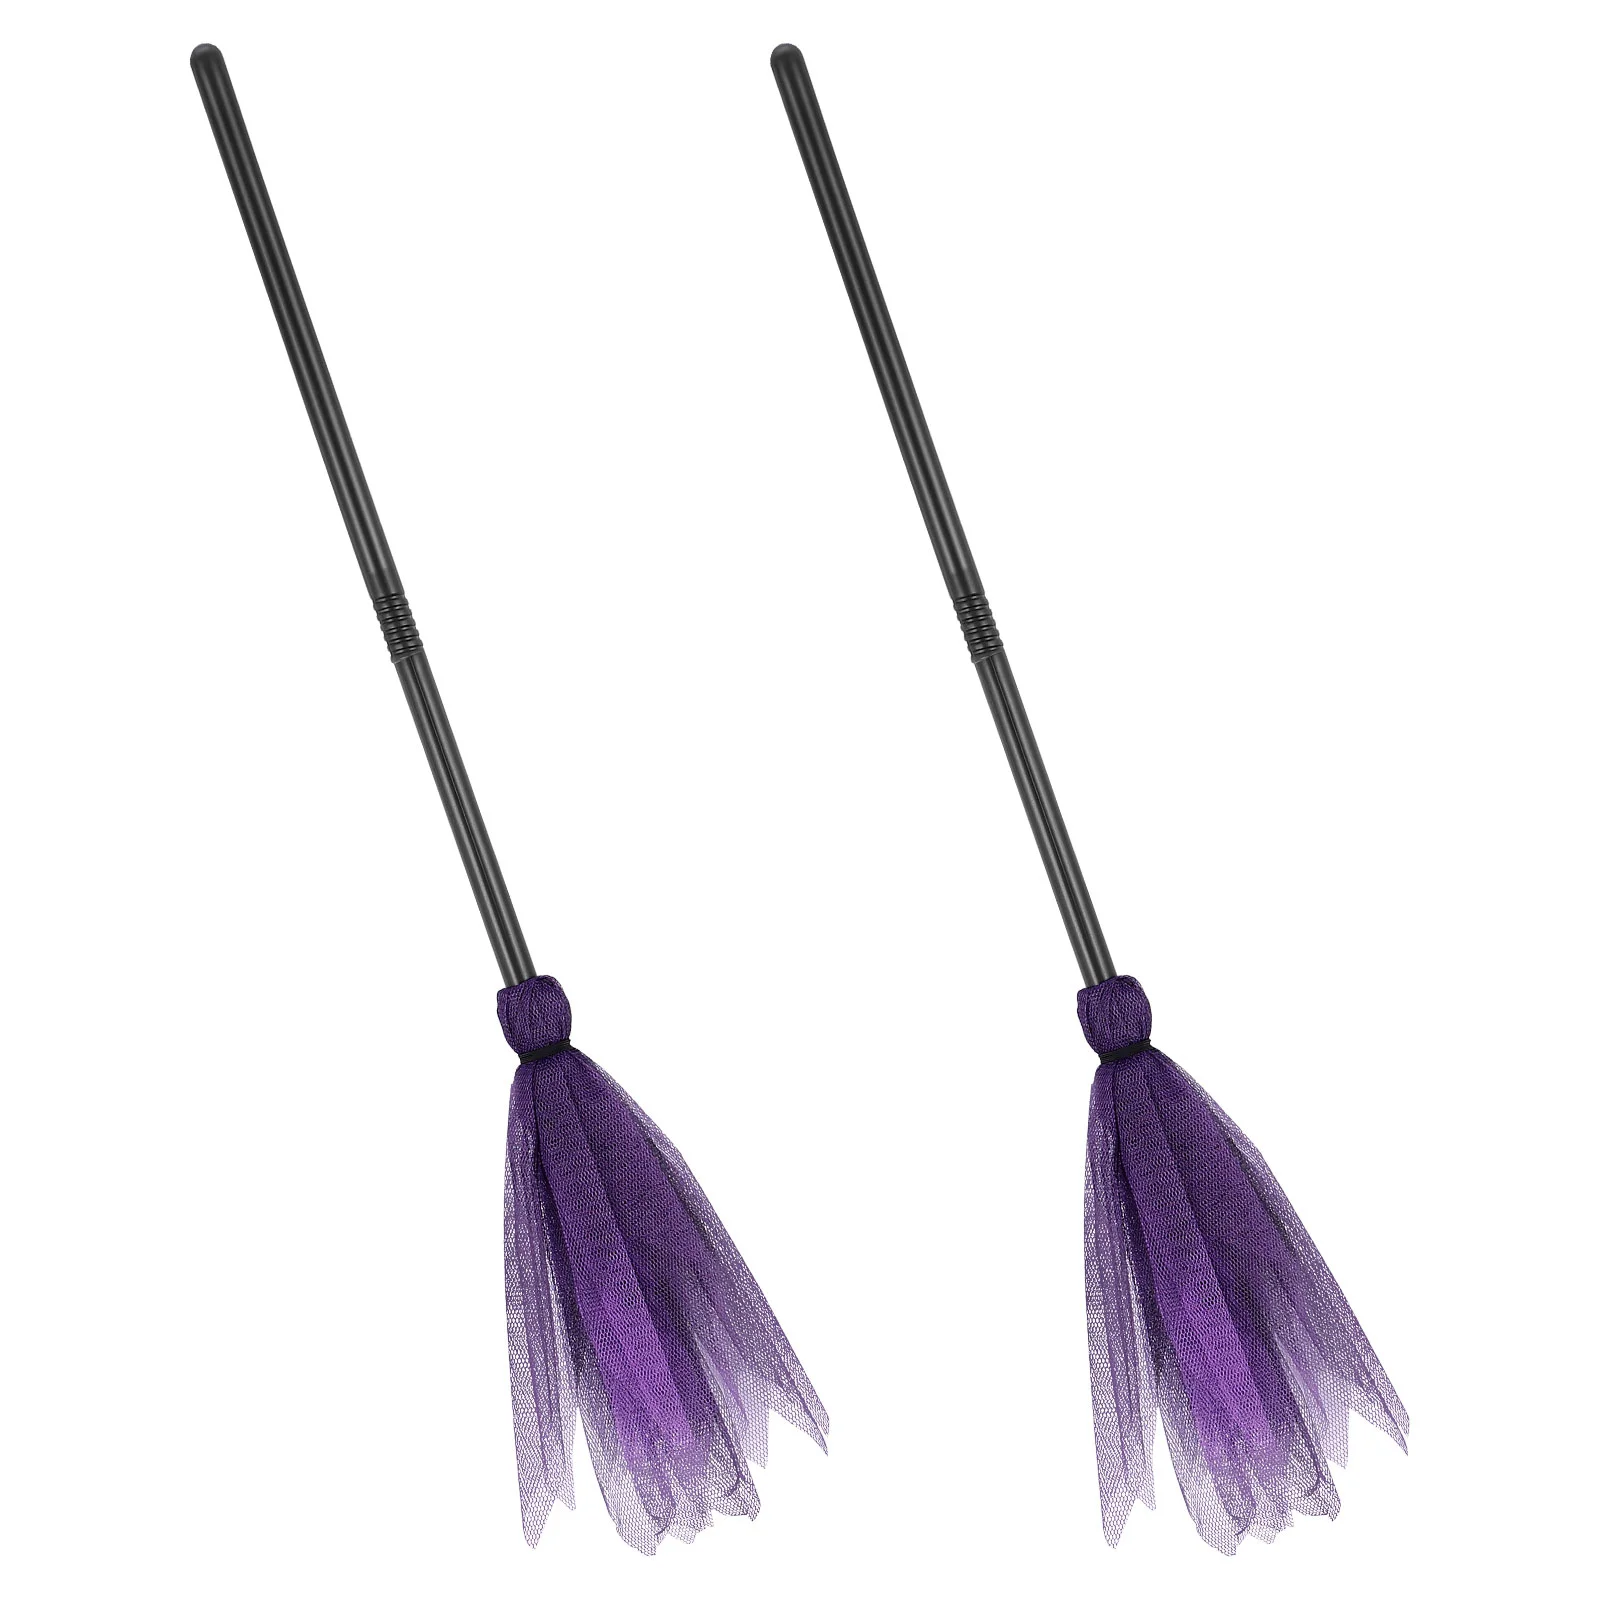 

2pcs Halloween Witch Broom Decorations Performance Props Kids Toys Witch Broomstick (Random Color)